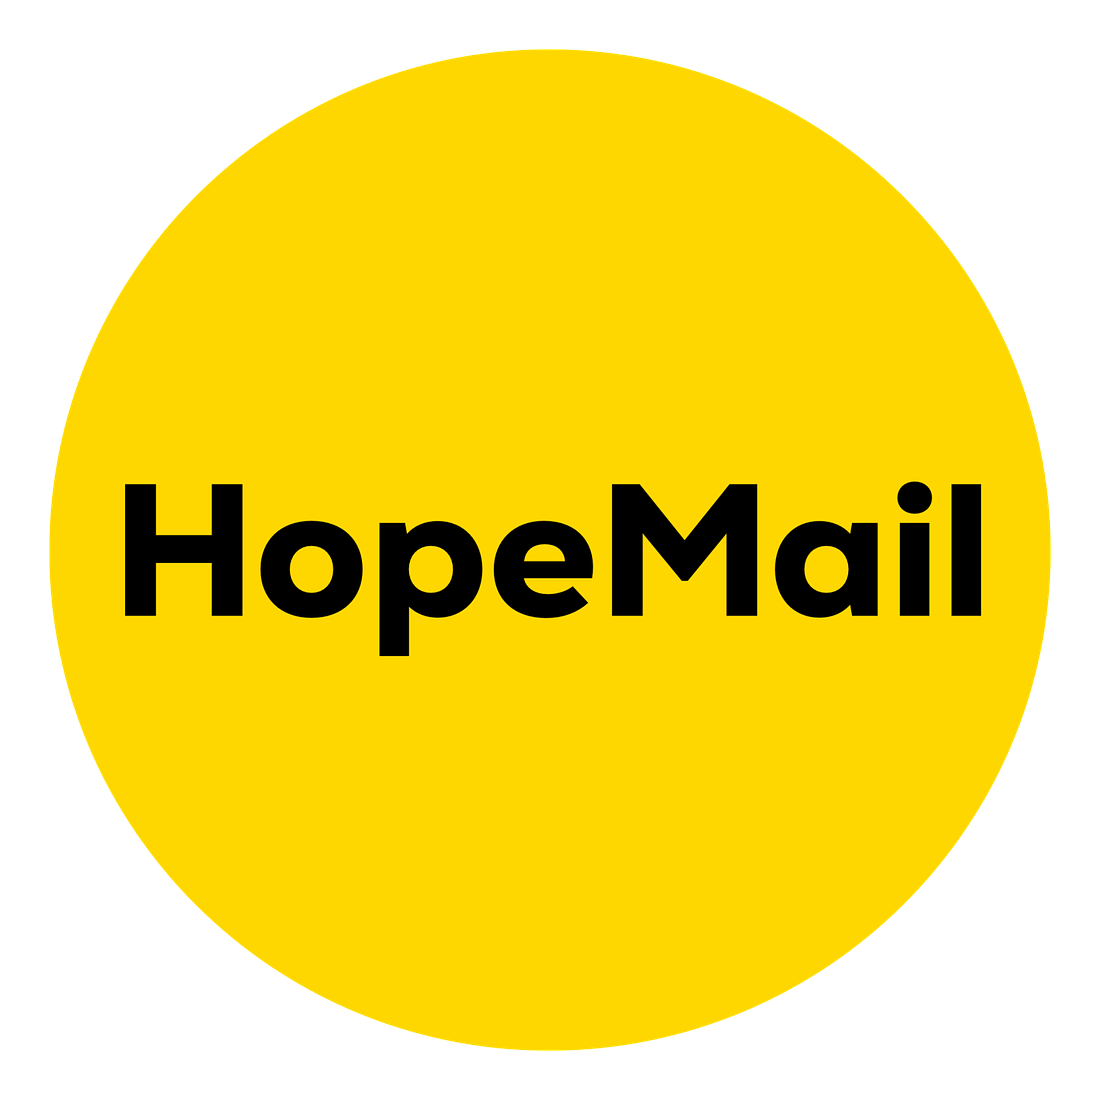 HopeMail newsletter icon